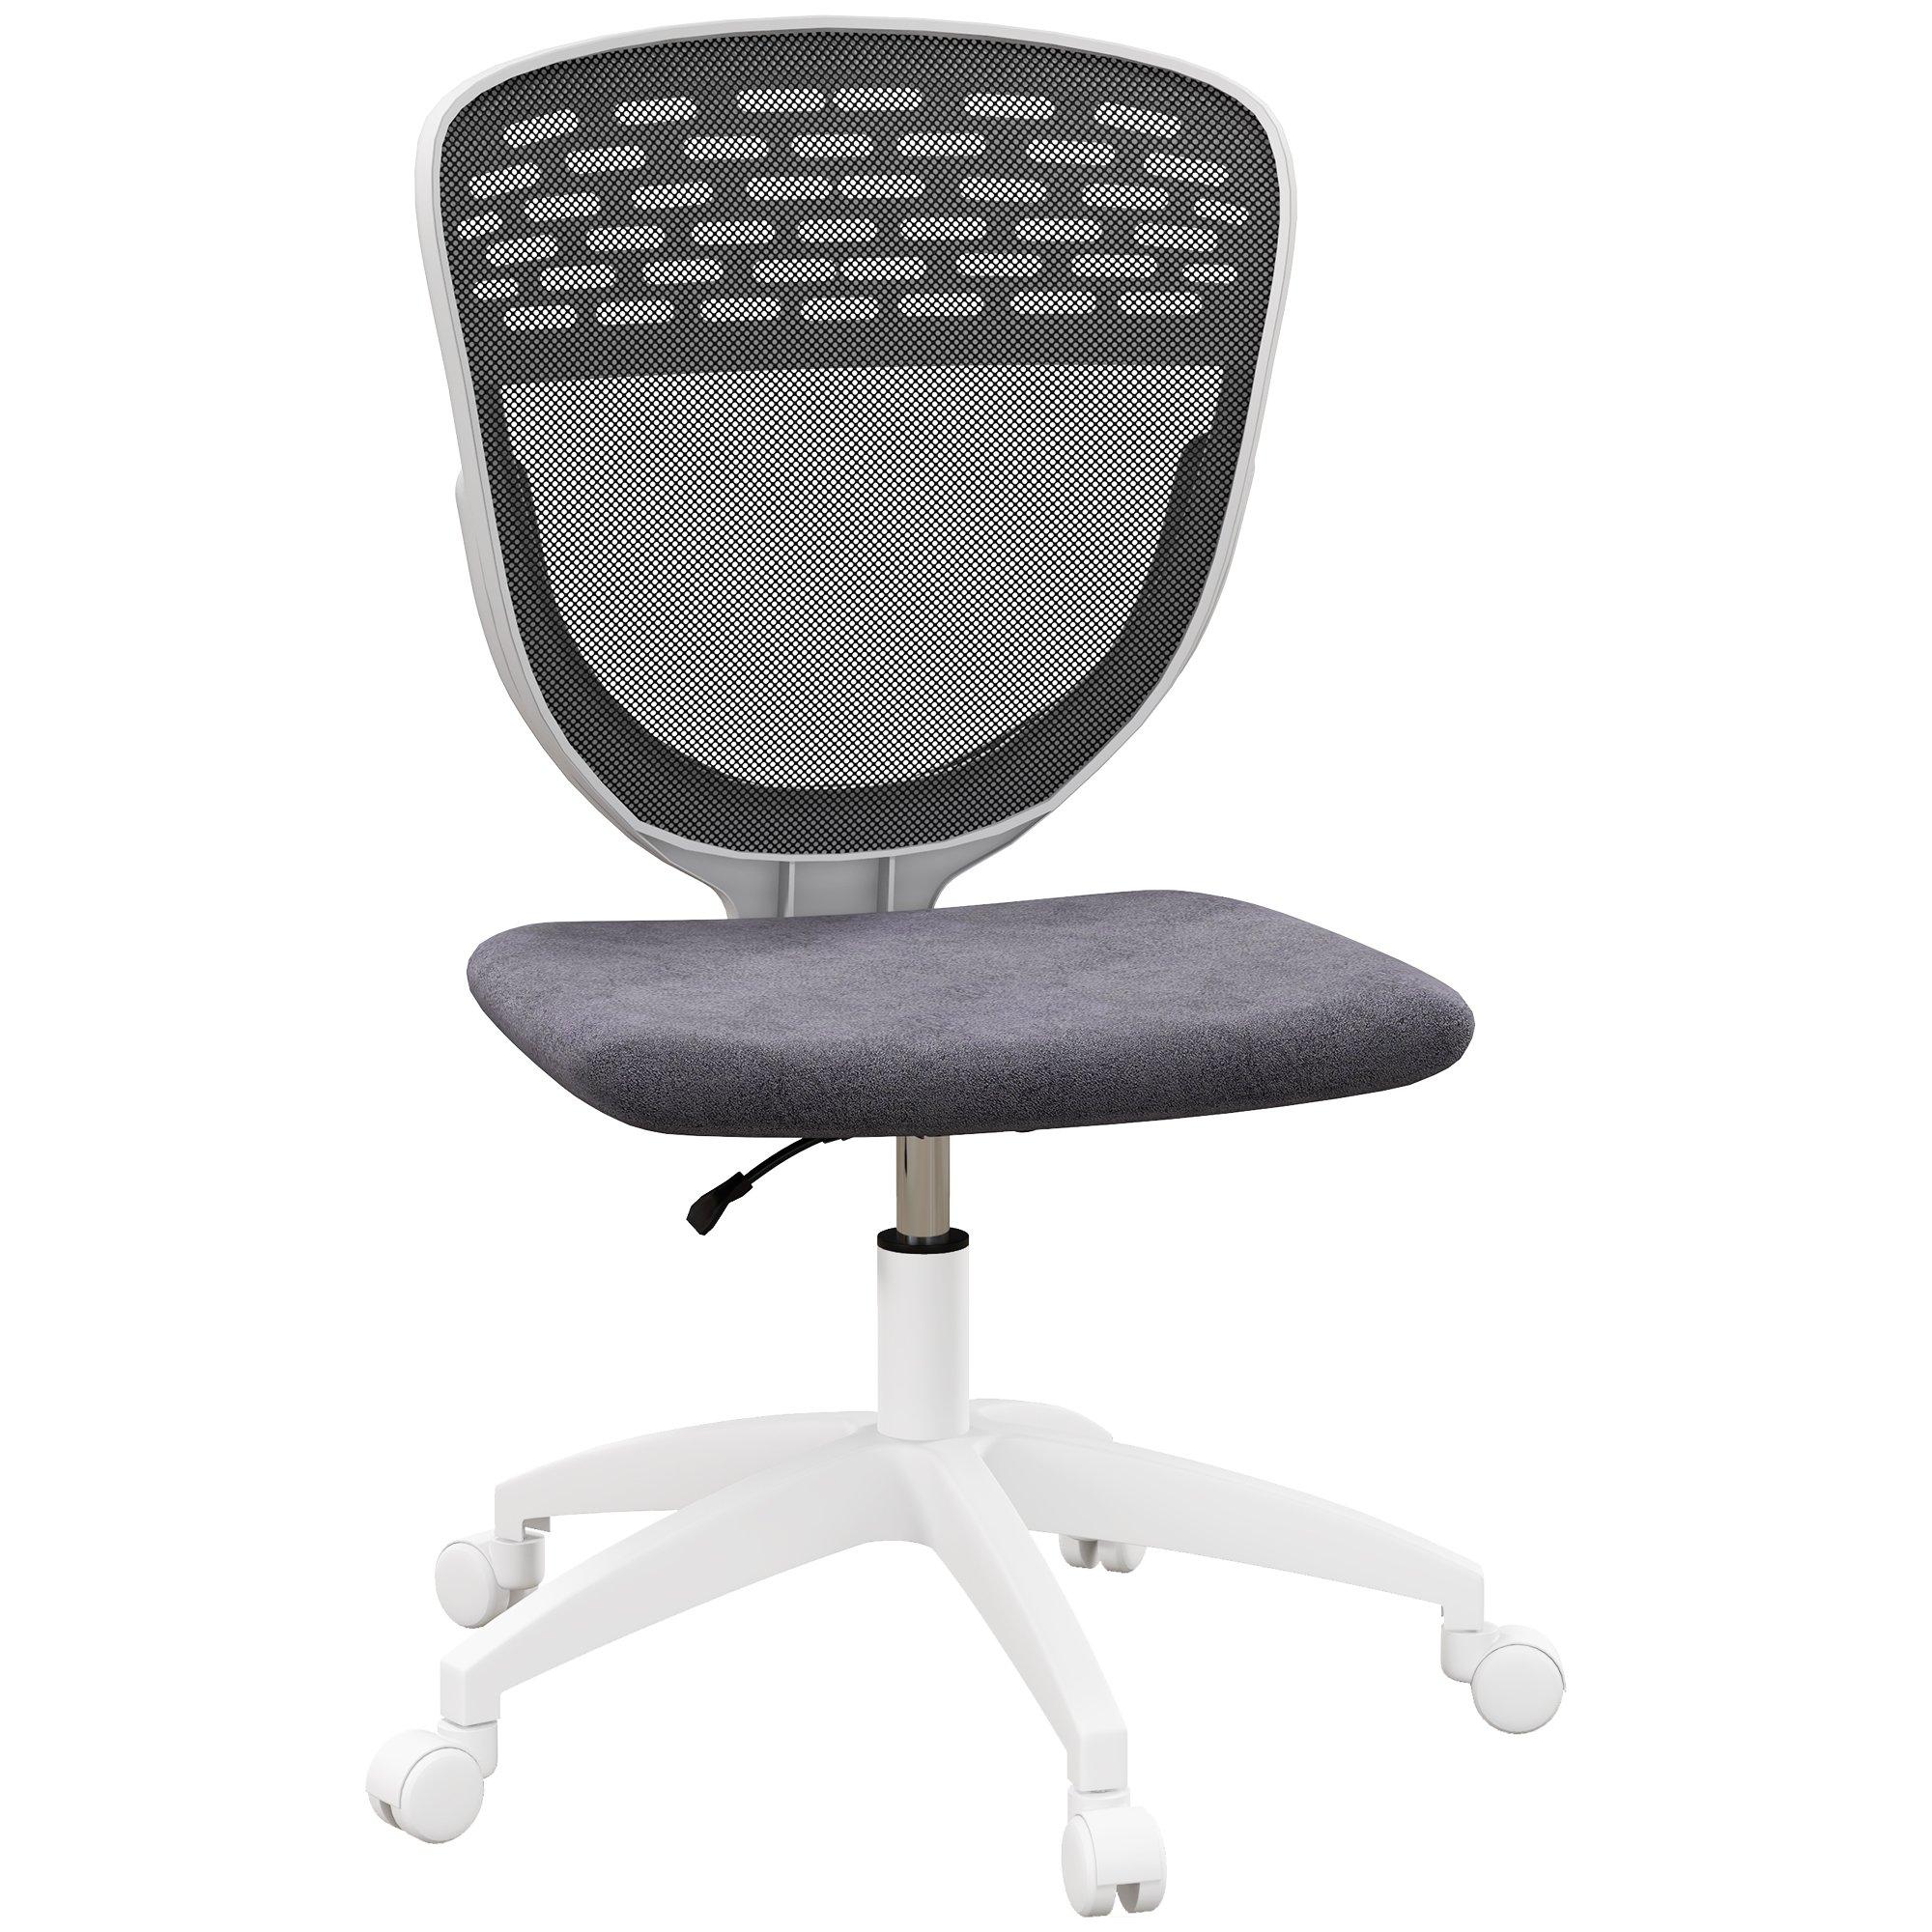 Armless Desk Chair Height Adjustable Office Chair with Swivel Wheels